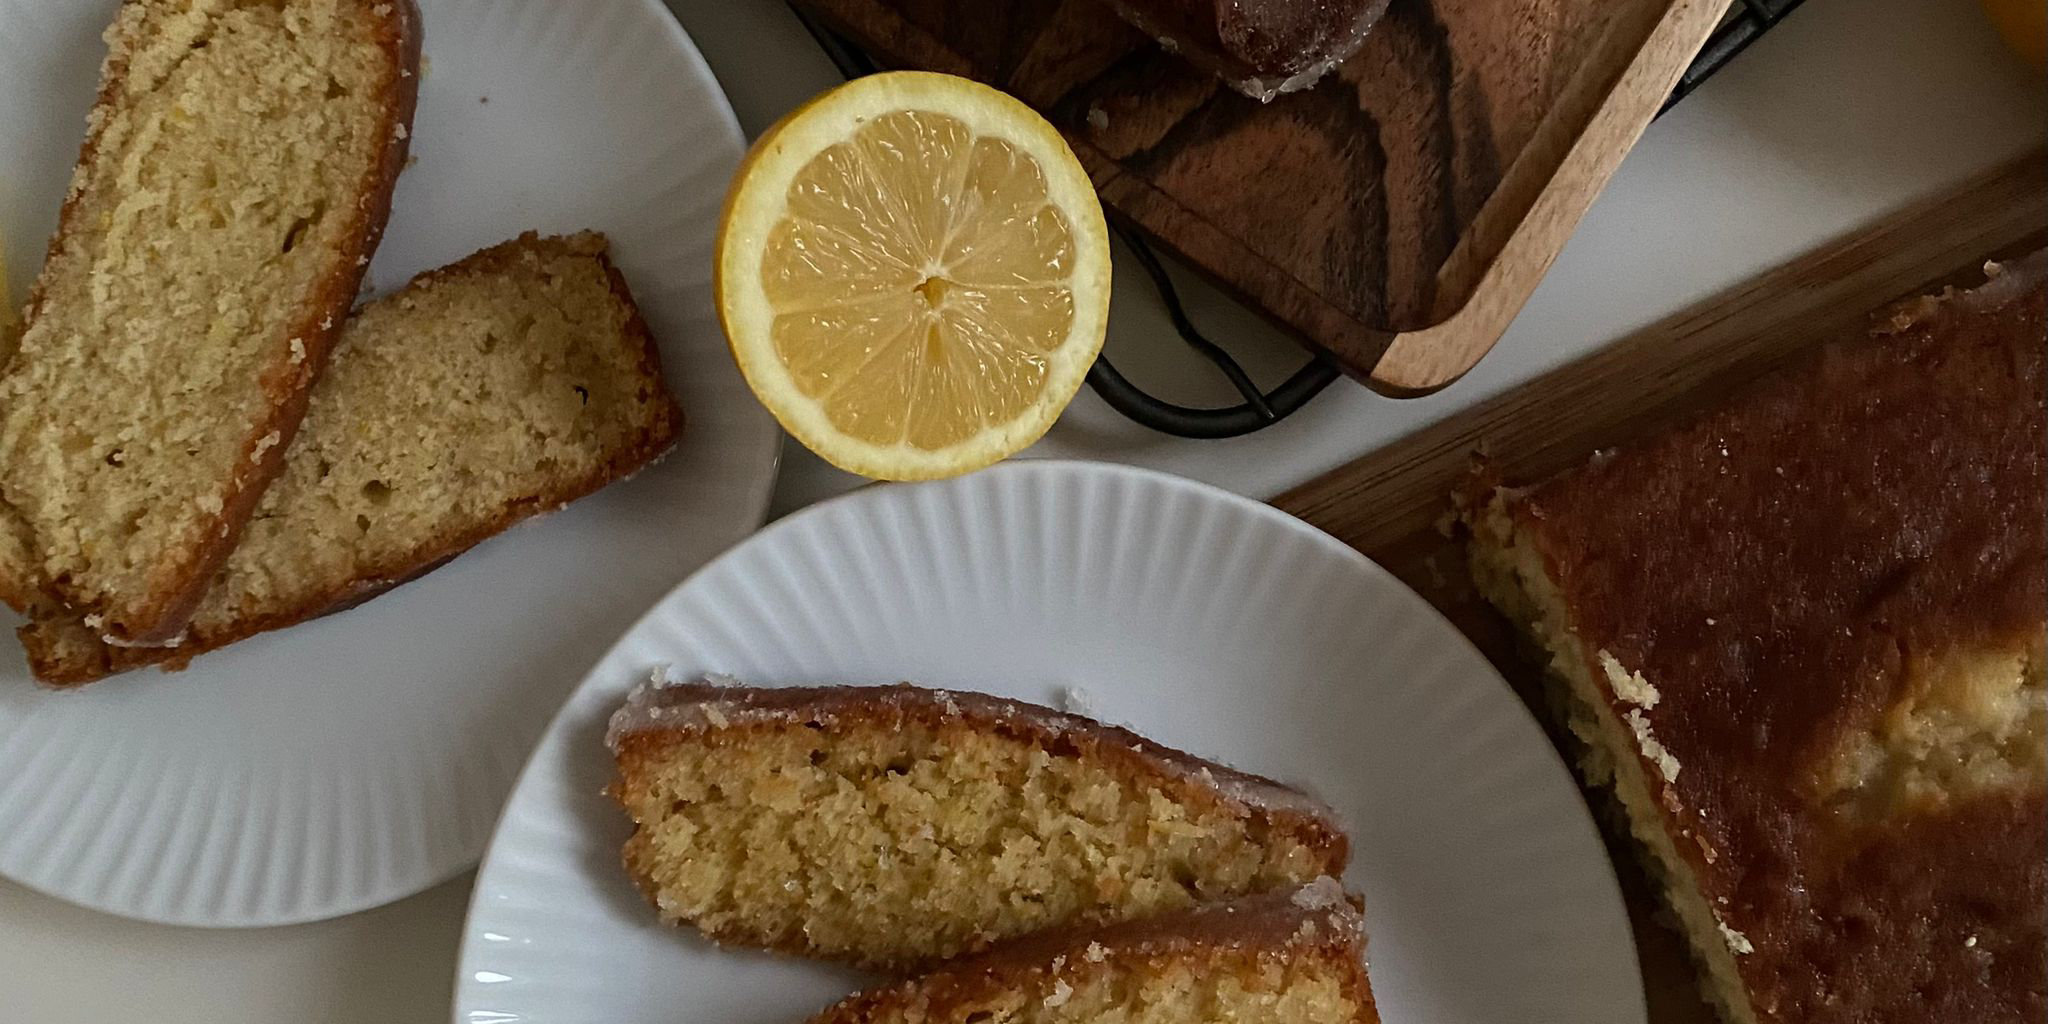 Slices of Mary Berry's and Nigella's lemon drizzle cakes on white plates